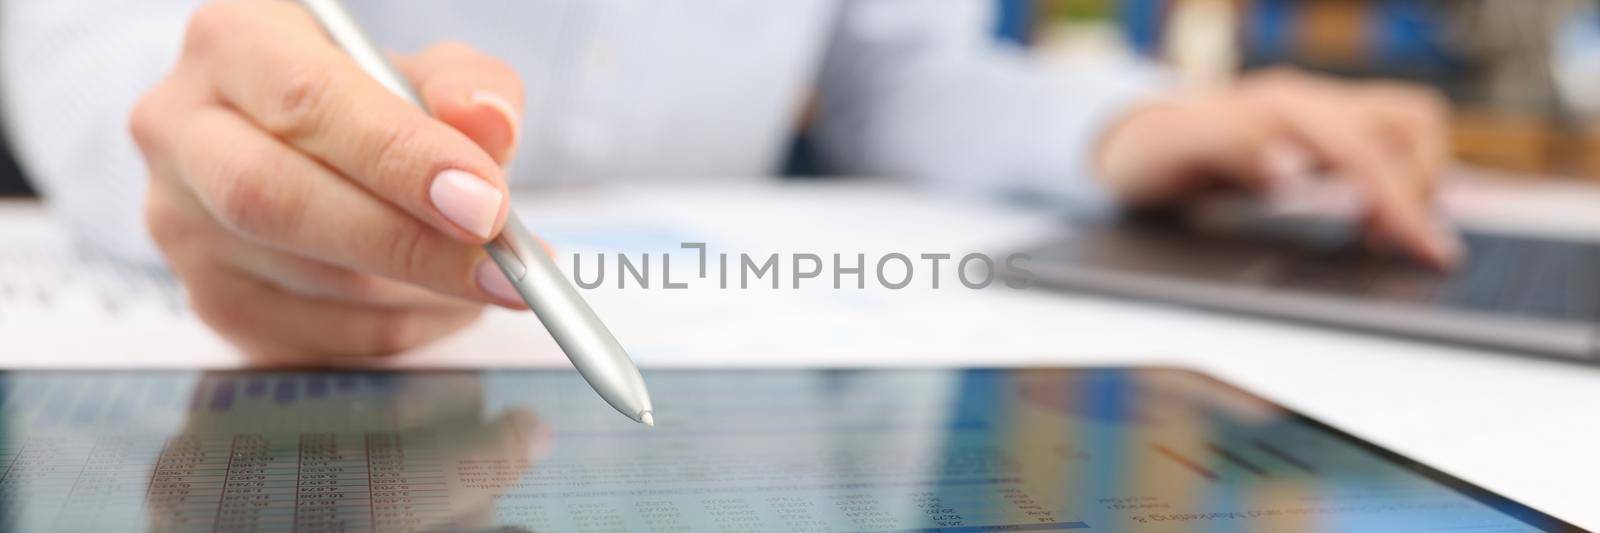 Female hand studying information on digital tablet with stylus closeup. Management concept